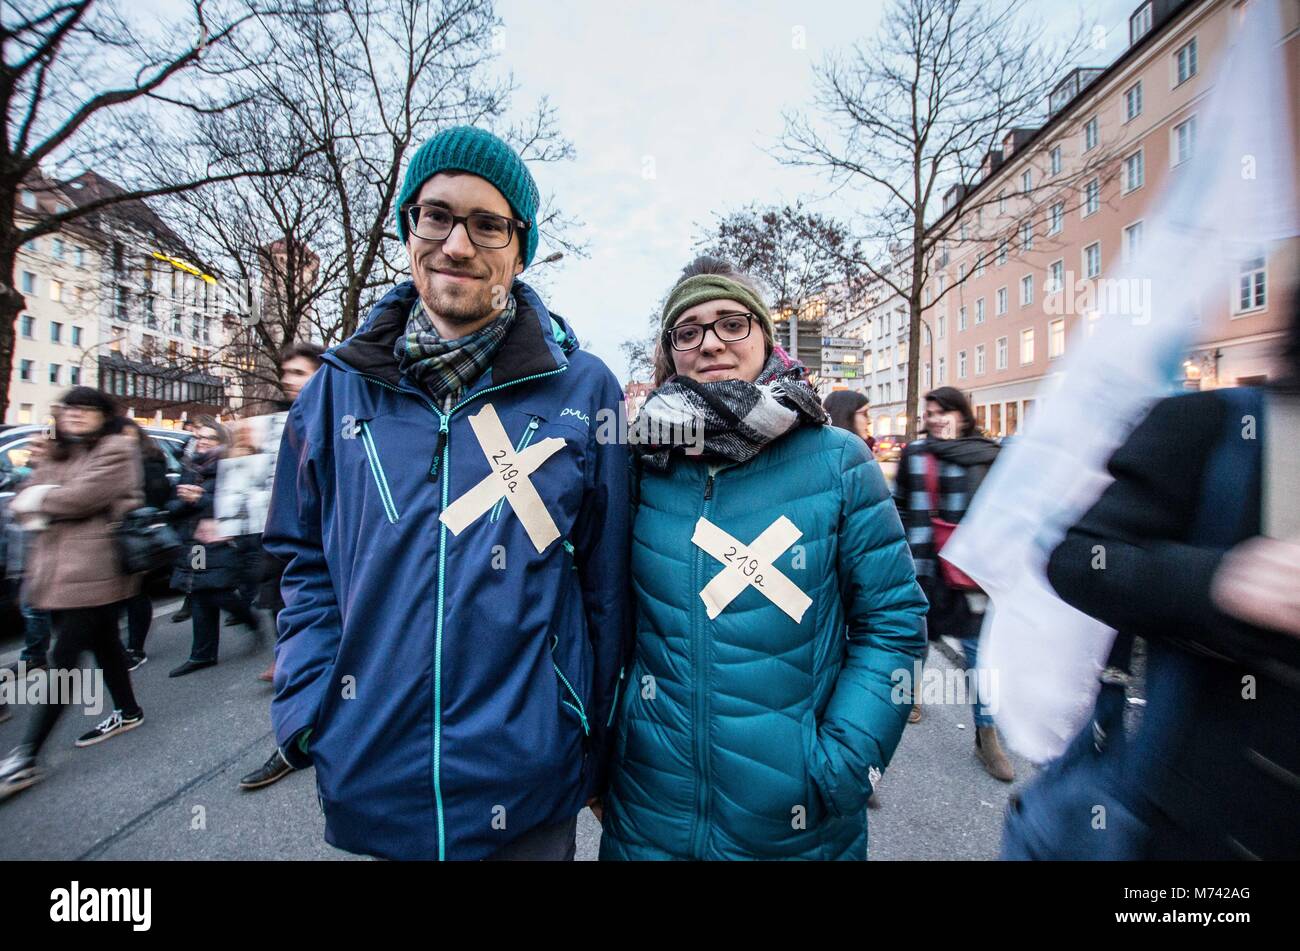 Munich, Bavaria, Germany. 8th Mar, 2018. 219a StGB or 219a, referring to the archaic Nazi-era law that is being used by anti-abortionists against physicians in Germany. It was used successfully to prosecute Dr. Kristina HÃ¤nel (Haenel). Joining the demonstrations around the world, 550 citzens of Munich joined together at Marienplatz to support women in their struggle for equality, equal pay, and fair treatment, among numerous other themes. Credit: Sachelle Babbar/ZUMA Wire/Alamy Live News Stock Photo